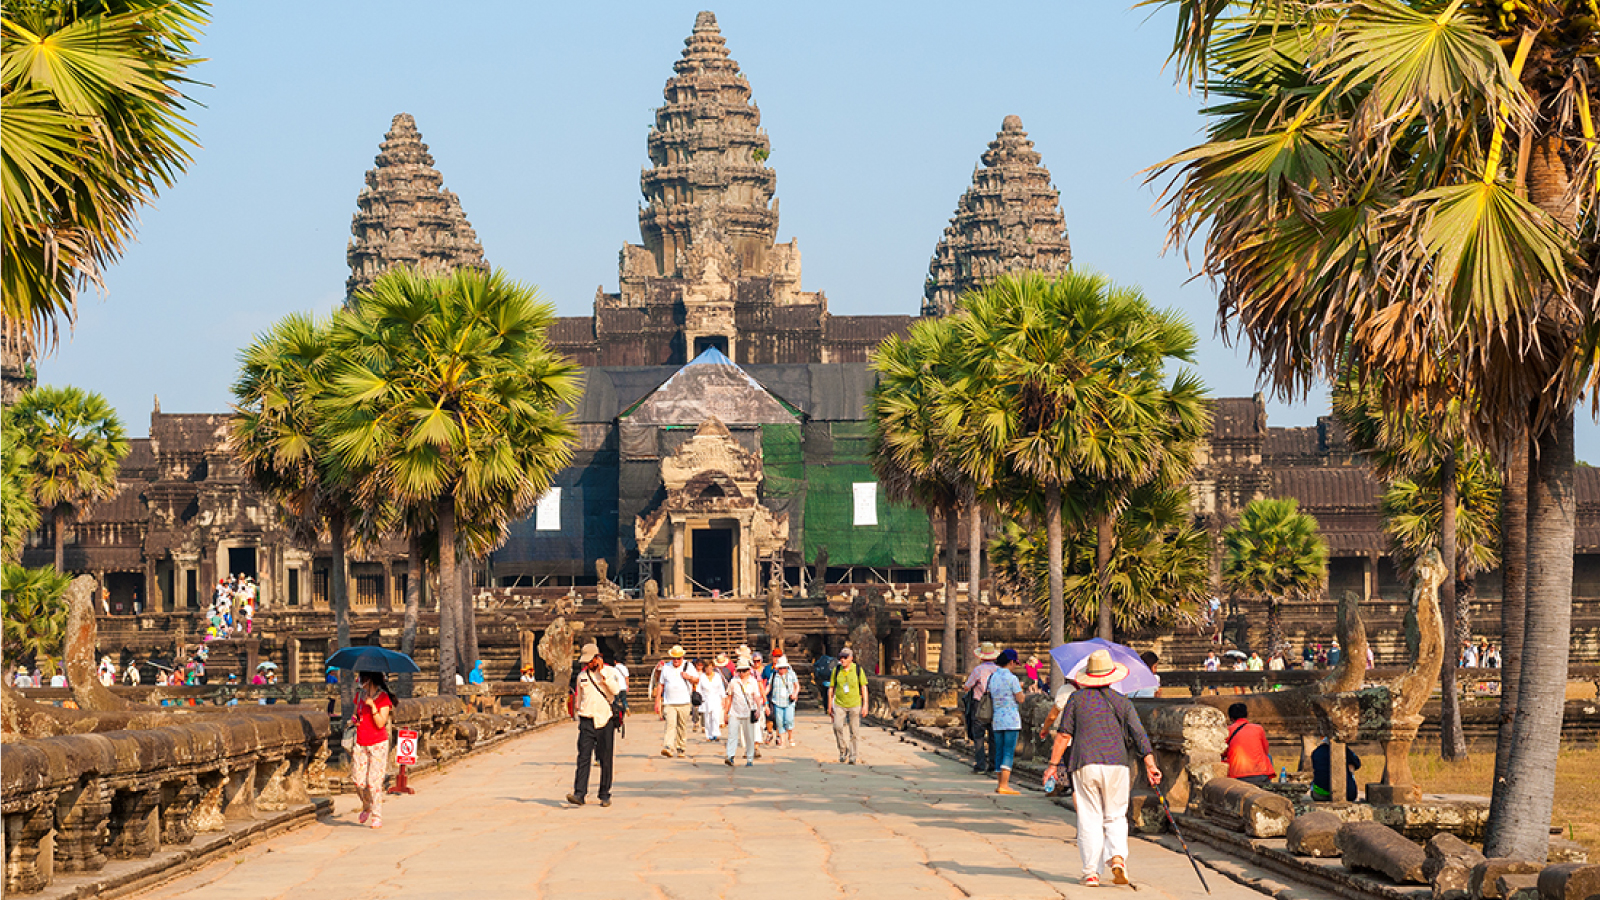 Cambodia in Brief - A Quick Guide to Siem Reap - Wide Eyed Tours